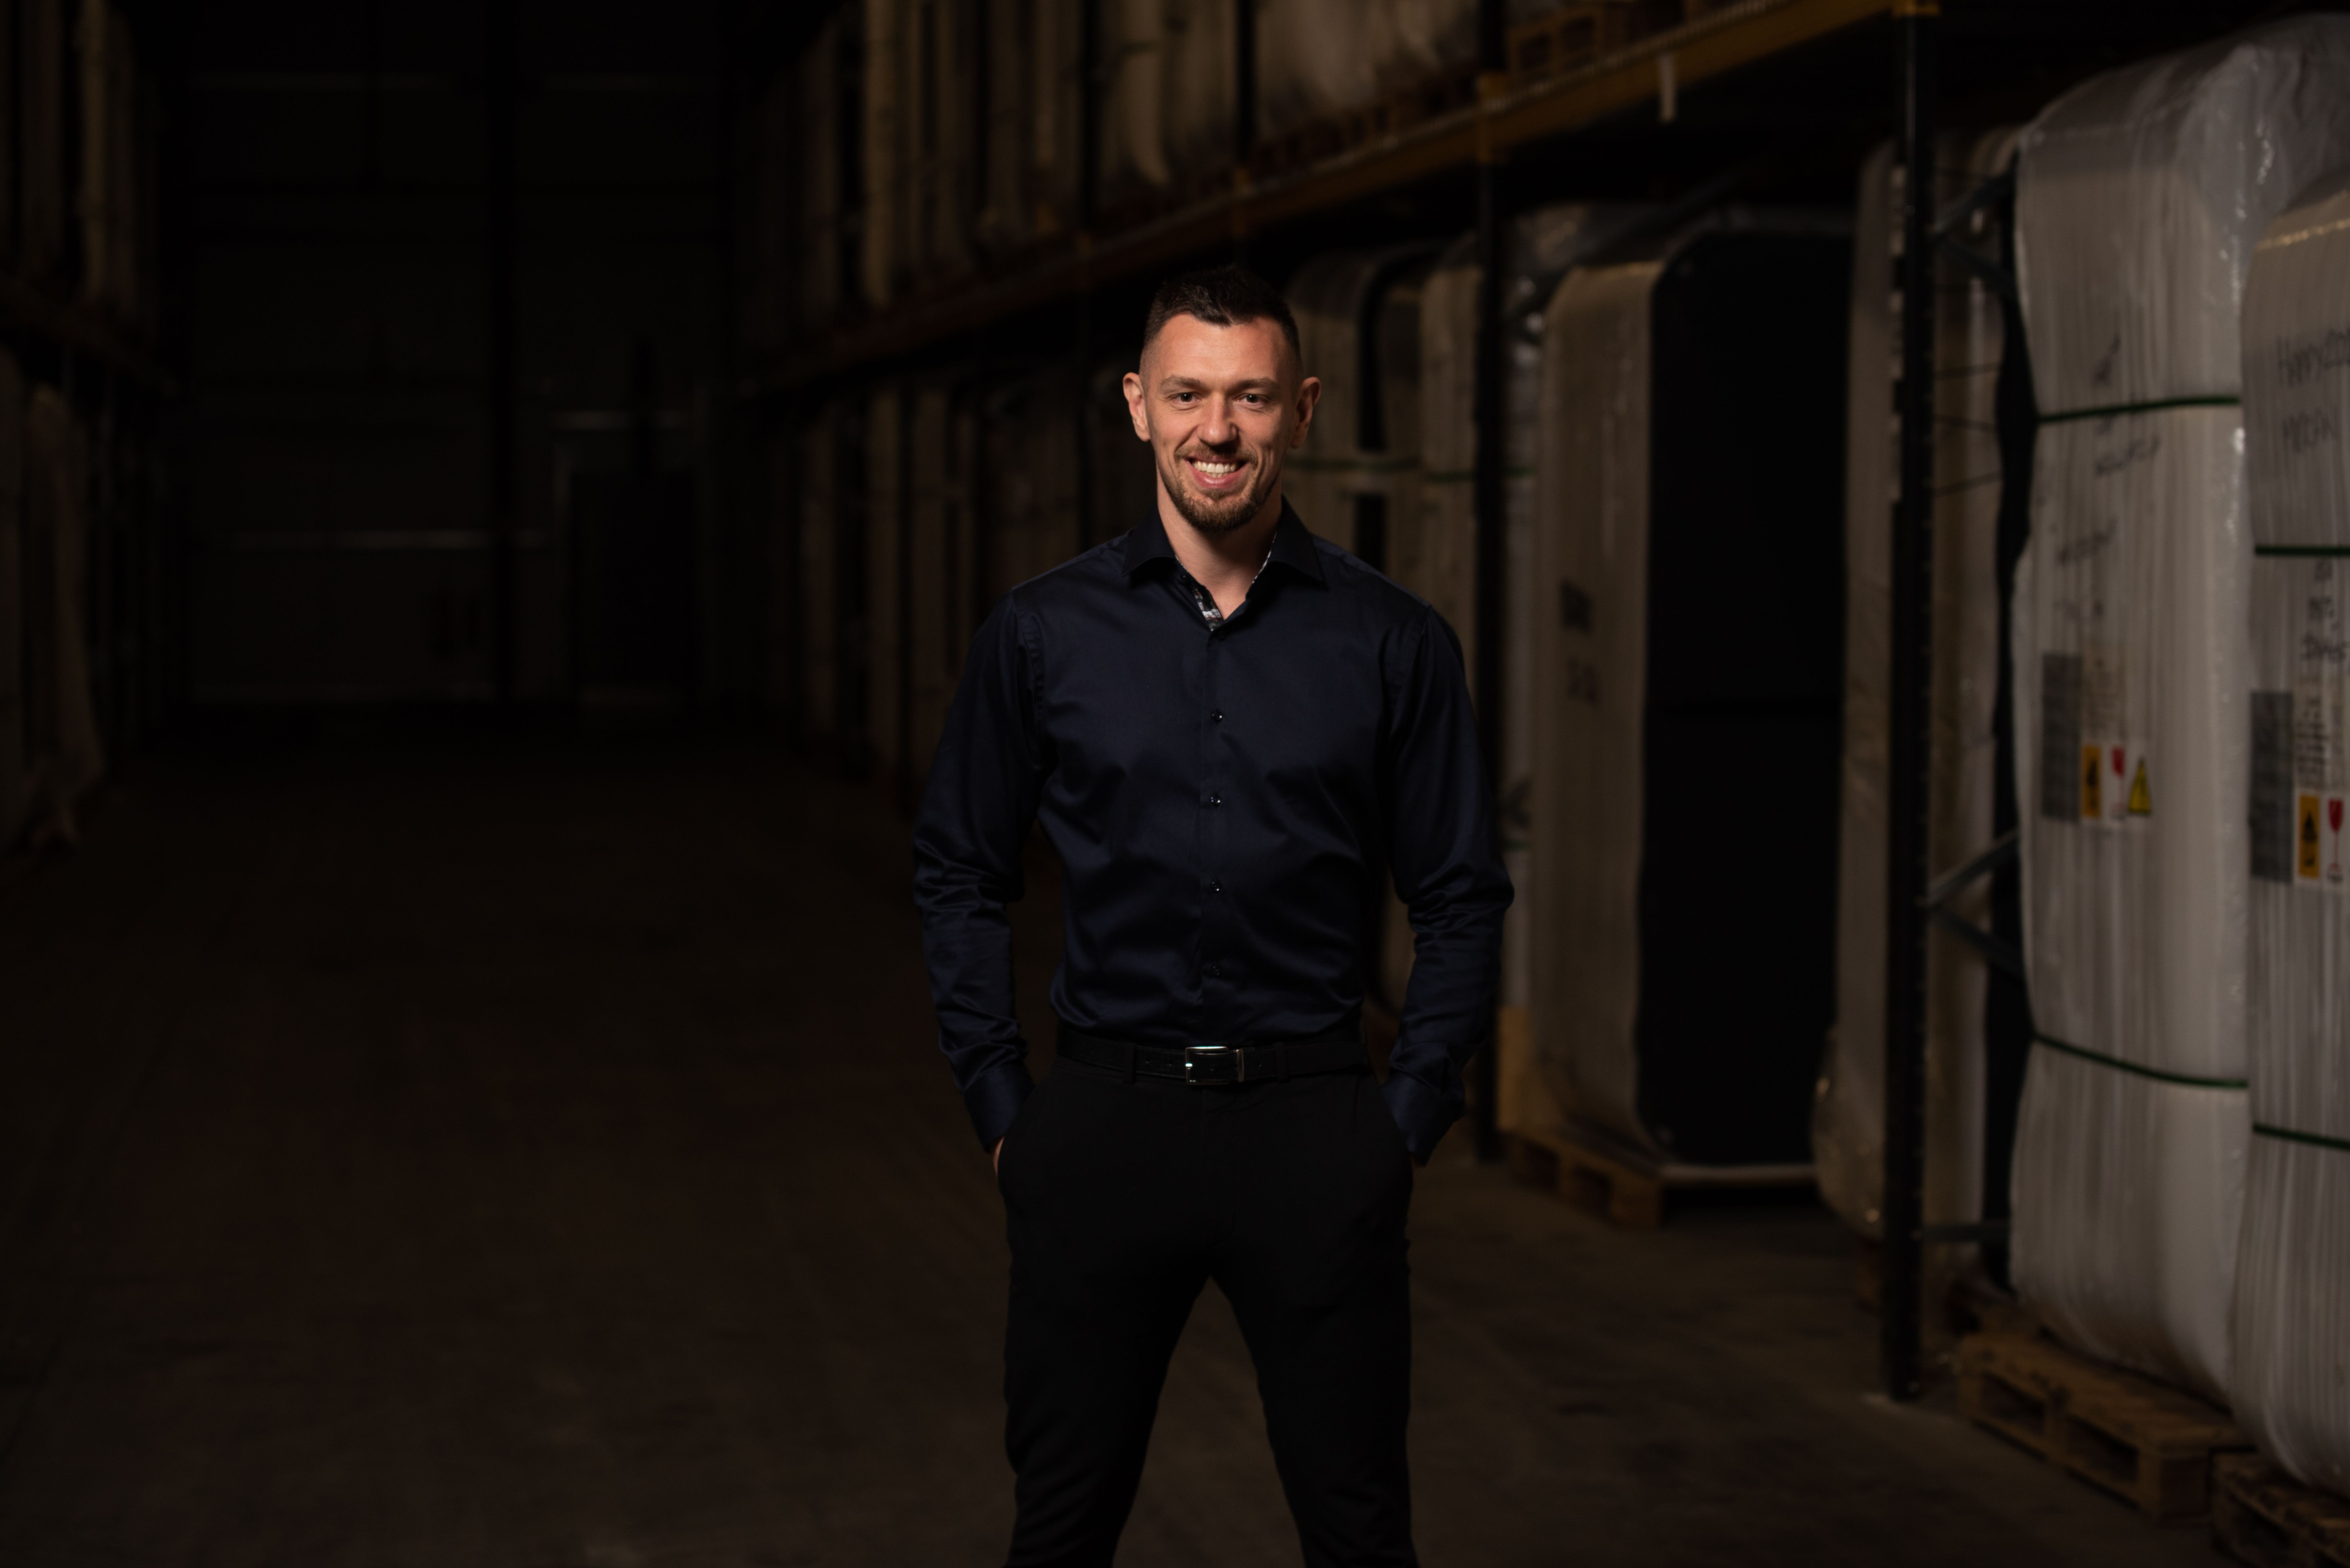 Rob Carlin, Managing Director at Superior Wellness, has been recognised as an inspiring and influential entrepreneur by organisers of the Great British Business Awards 2022.